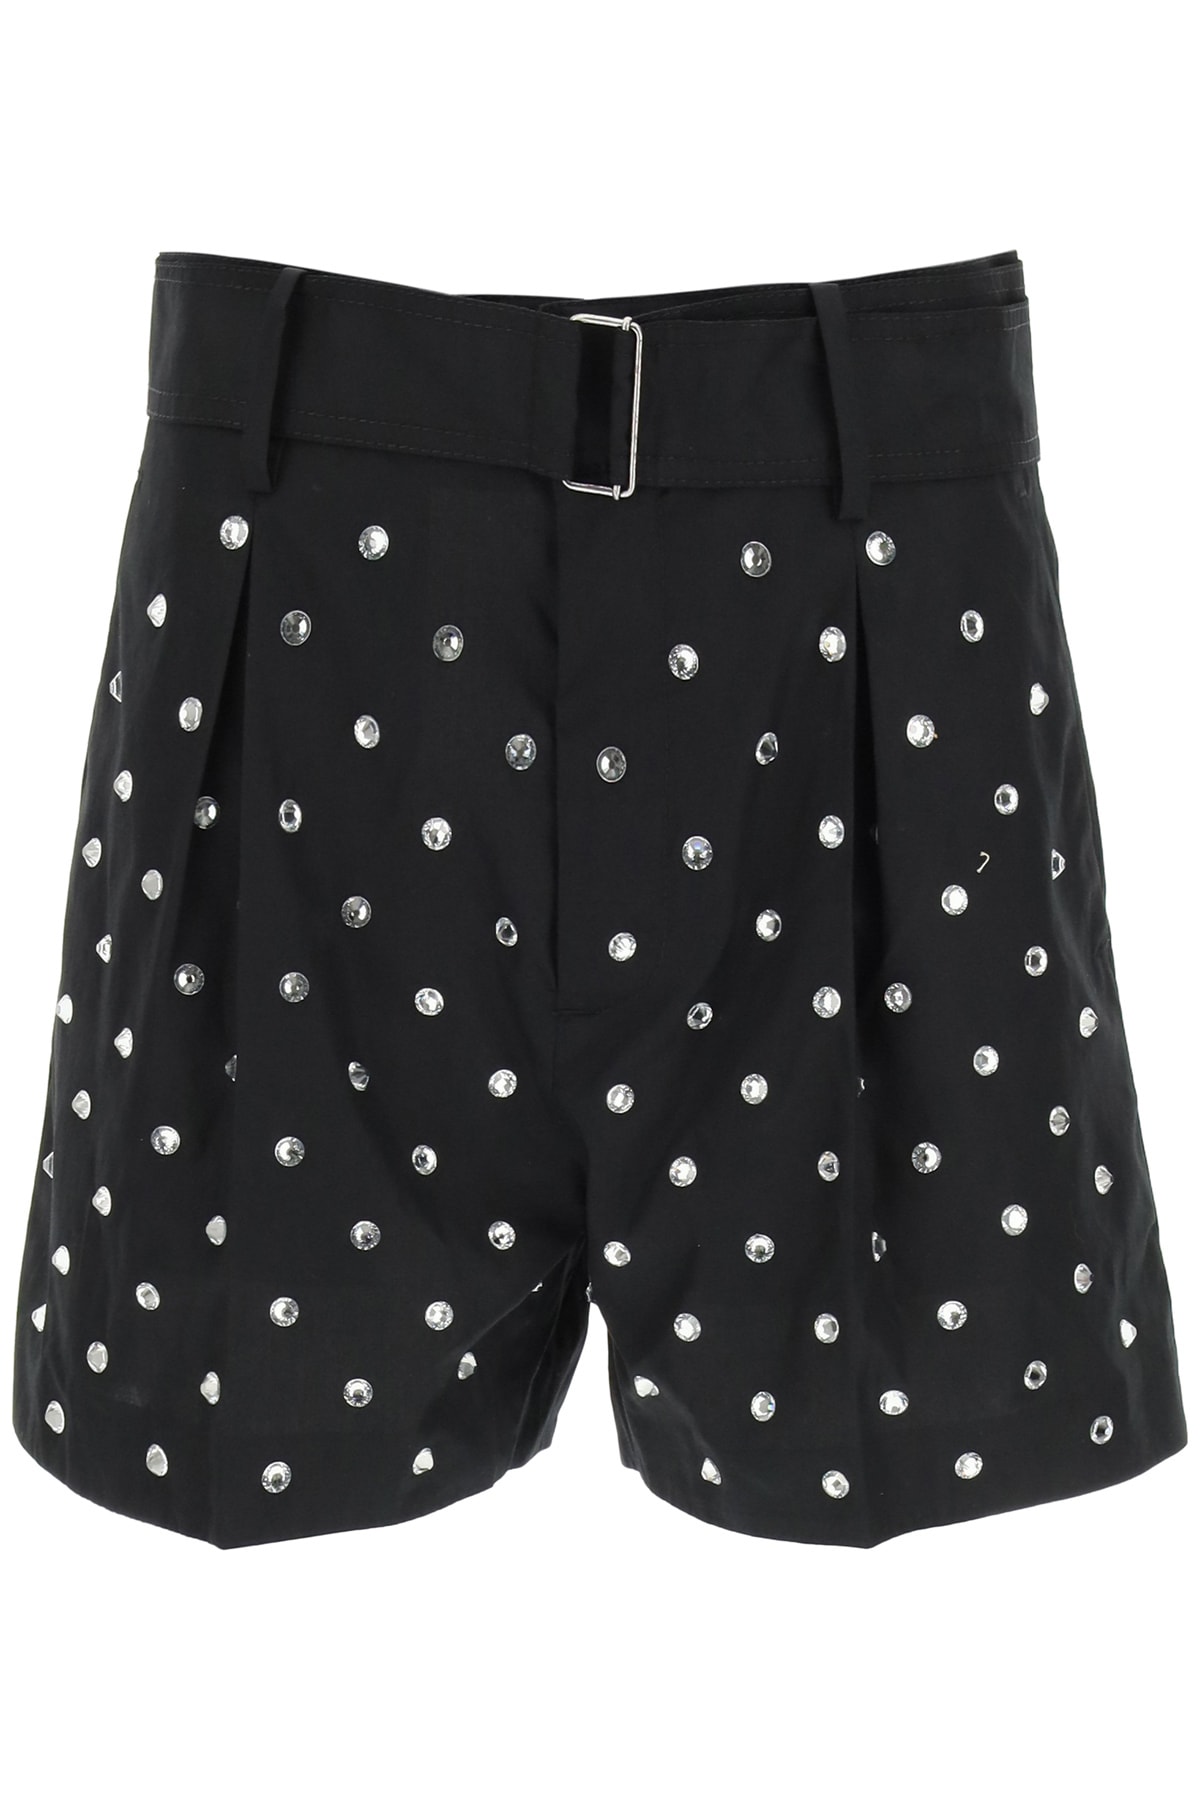 N.21 Jewel Shorts With Crystals